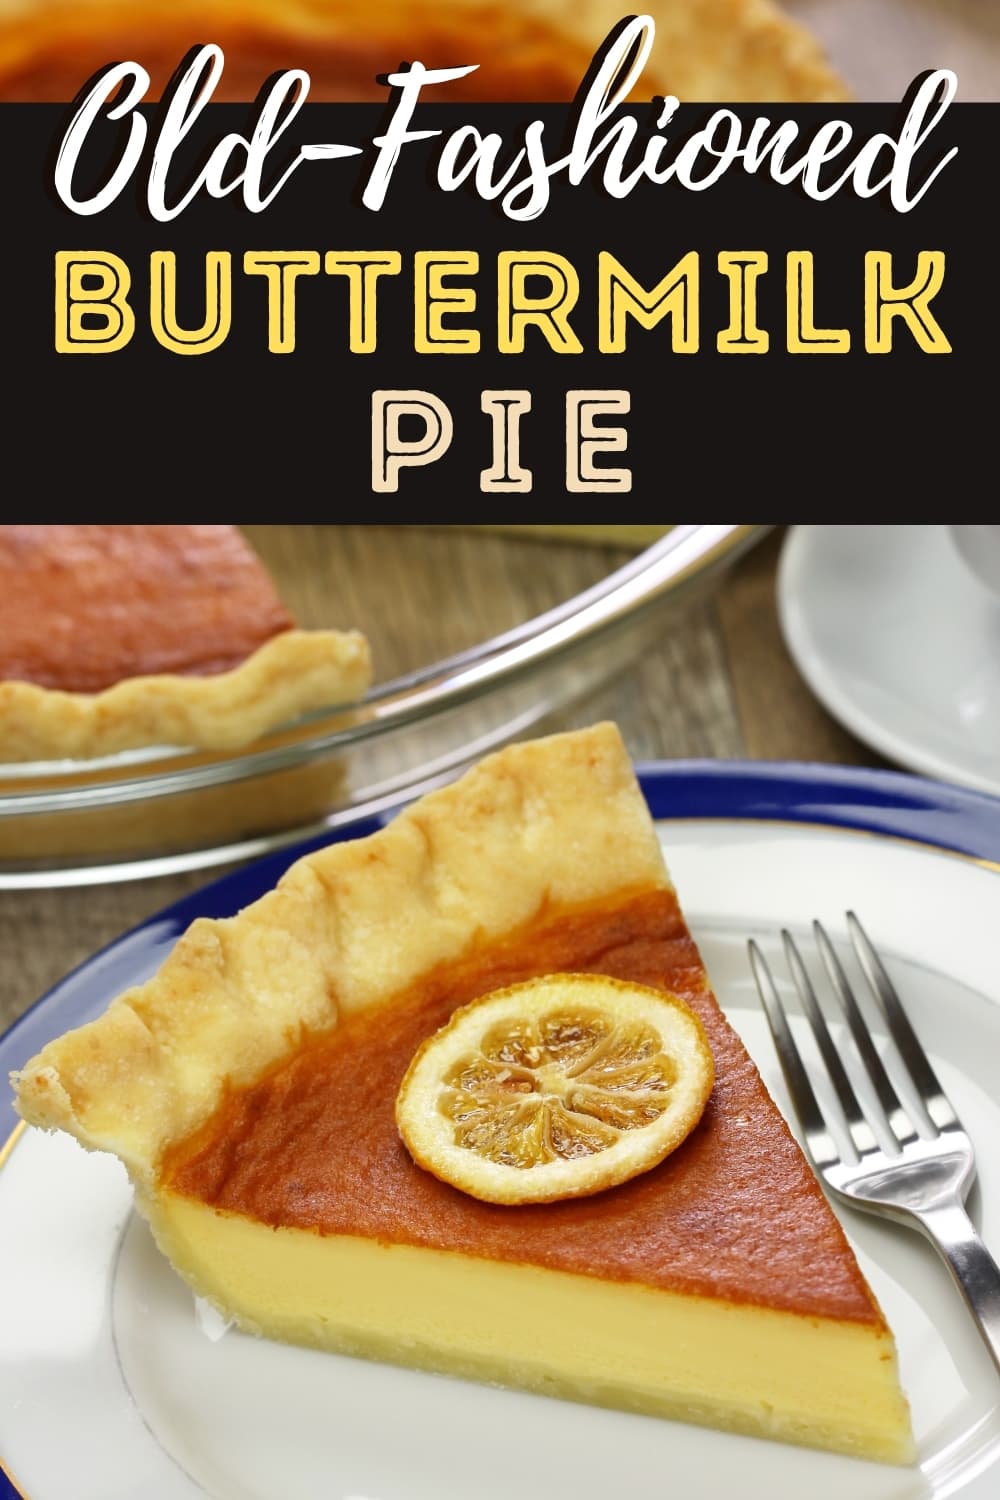 Old-Fashioned Buttermilk Pie - Insanely Good